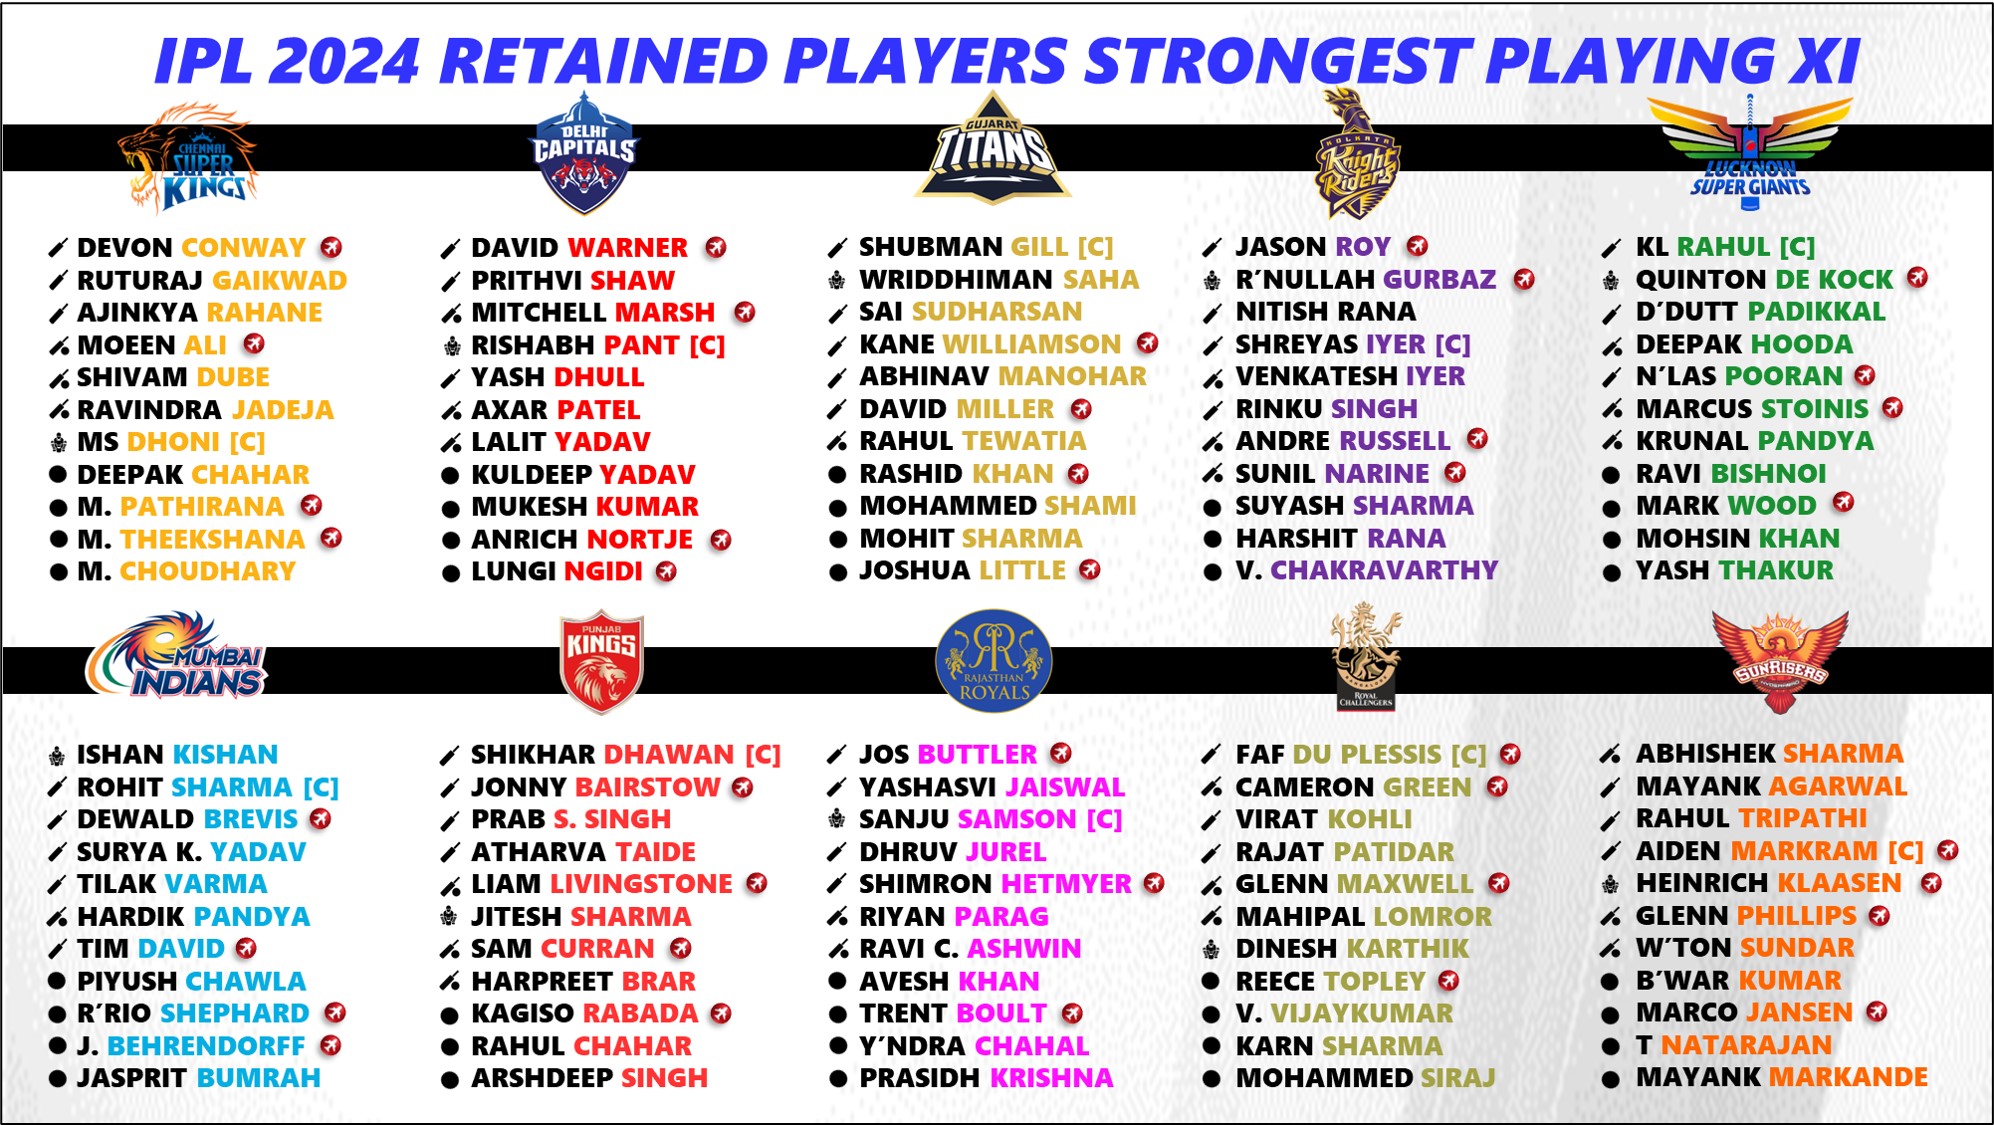 IPL 2024 Retained Players Playing 11 Ranking for All 10 Teams